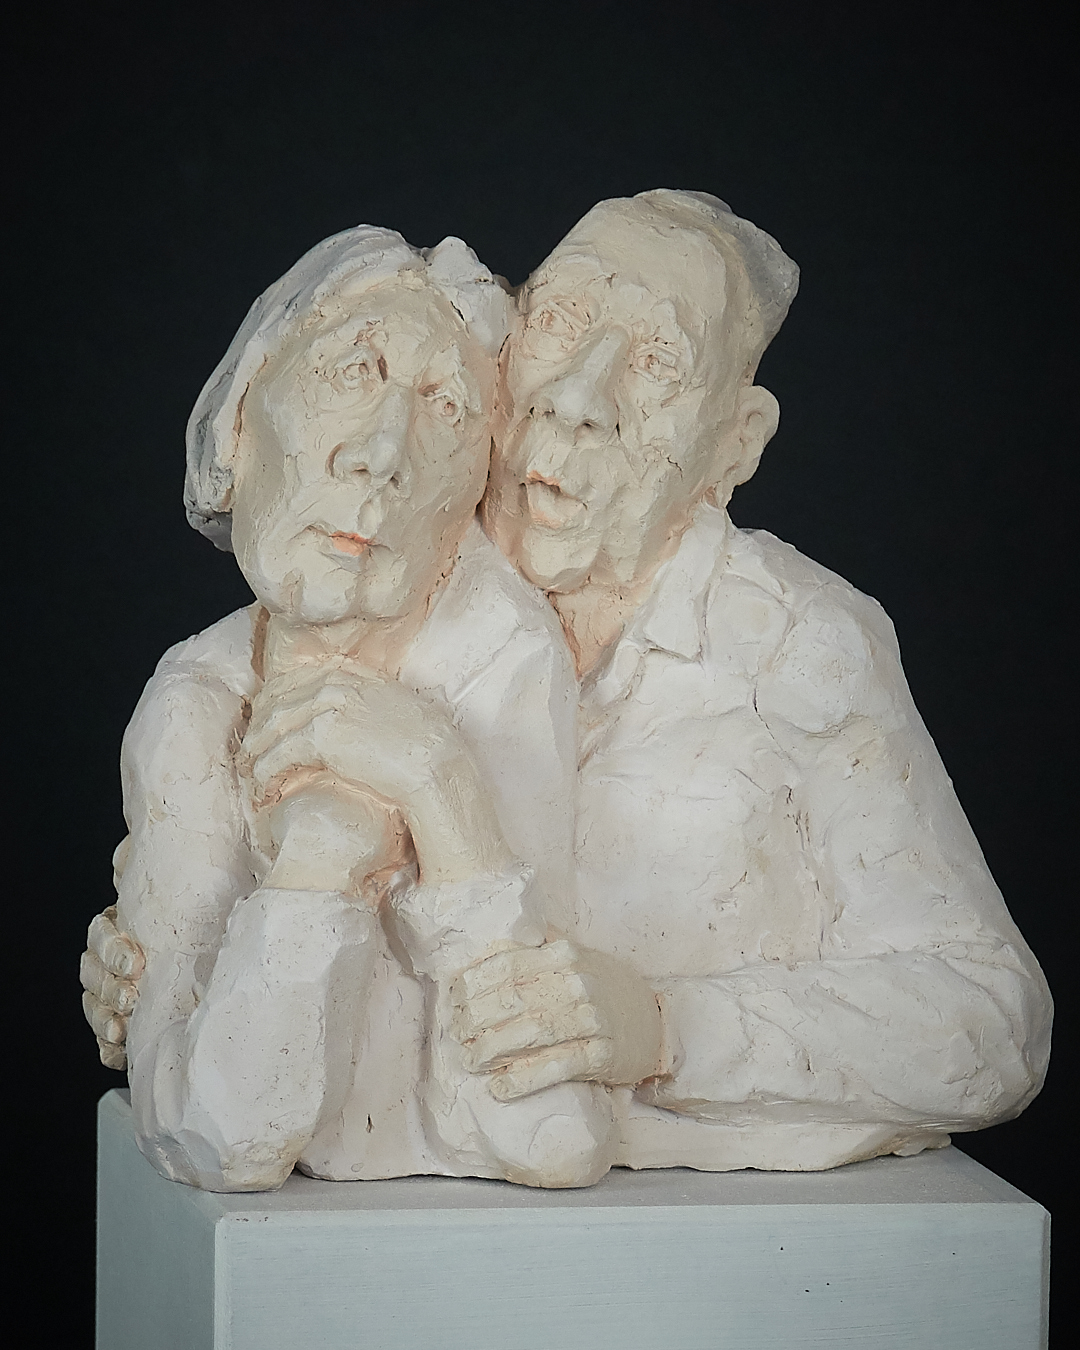 Uta Beckert "Sweetheart", Höhe 17cm without base, clay, 2018